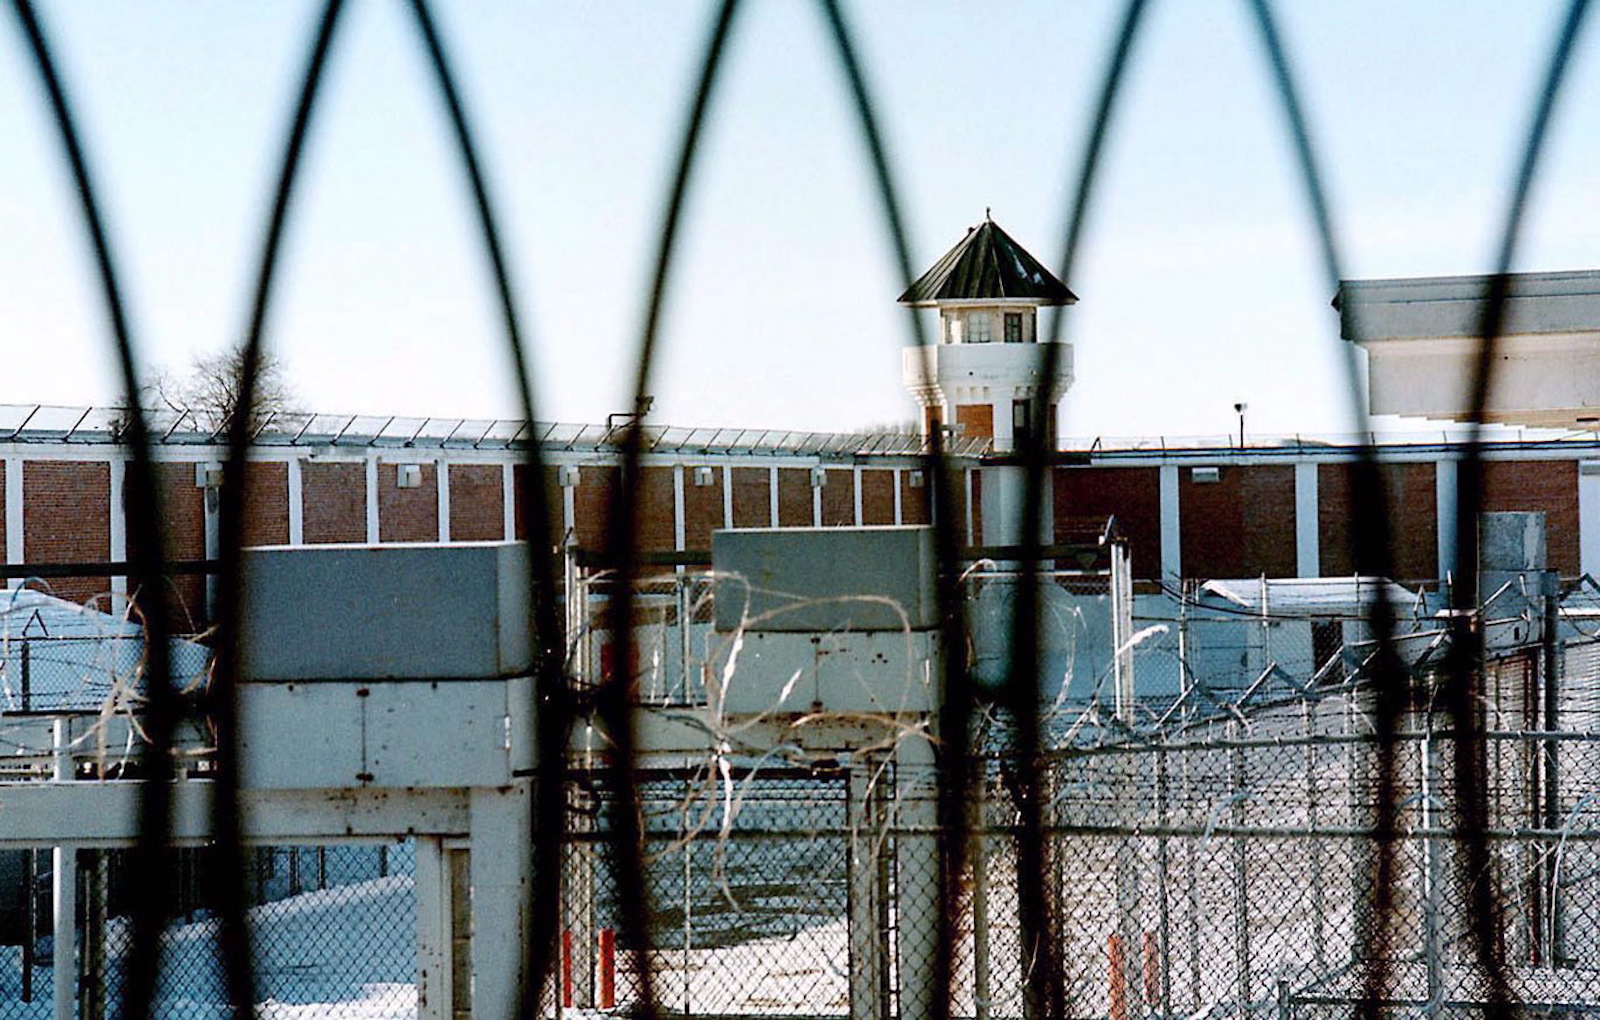 Plastic Sheets, Pencil Crayons, Cheese Strings: Inside One Canadian Prison’s Chaotic Effort to Stop a COVID-19 Outbreak